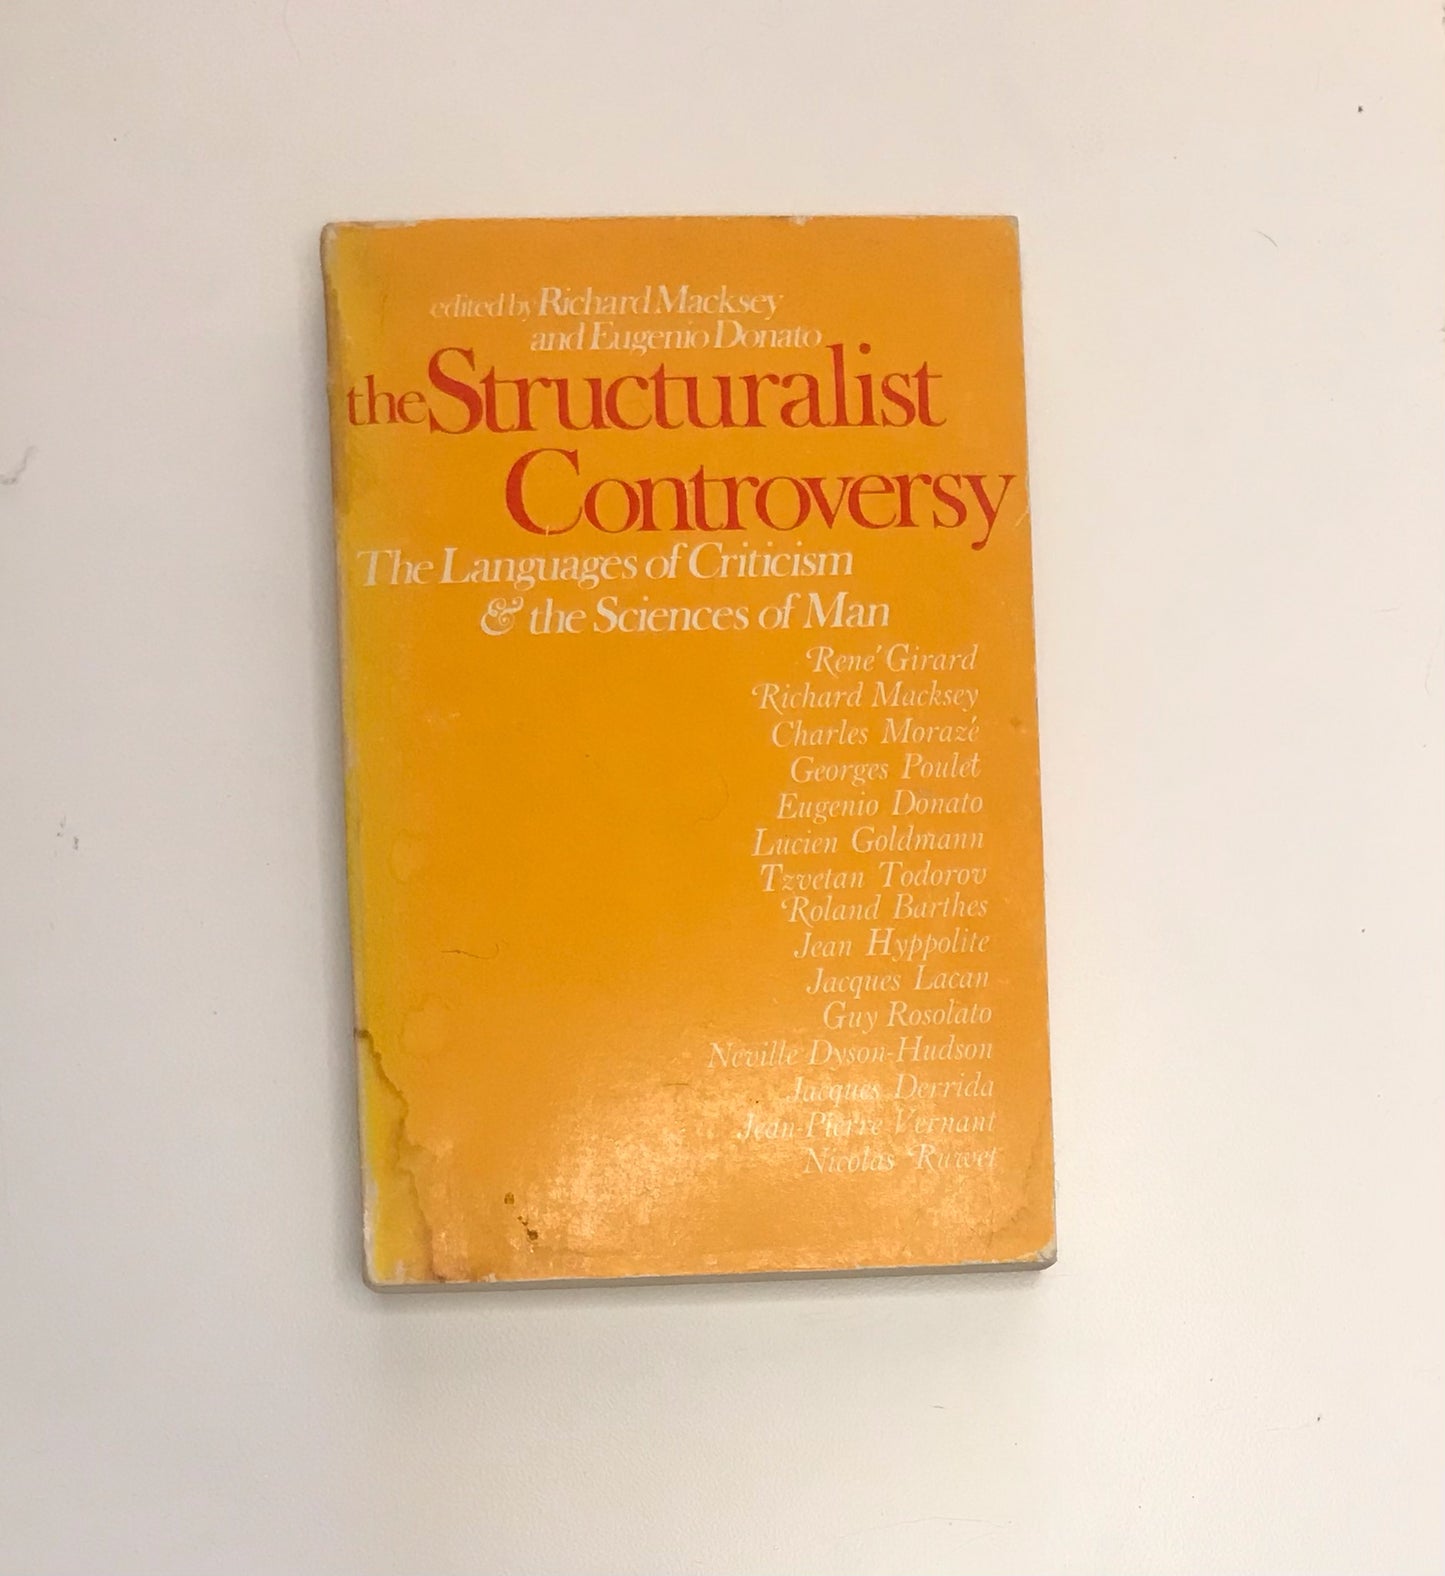 The structuralist controversy: The languages of criticism & the sciences of man - Richard Macksey &  Eugenio Donato